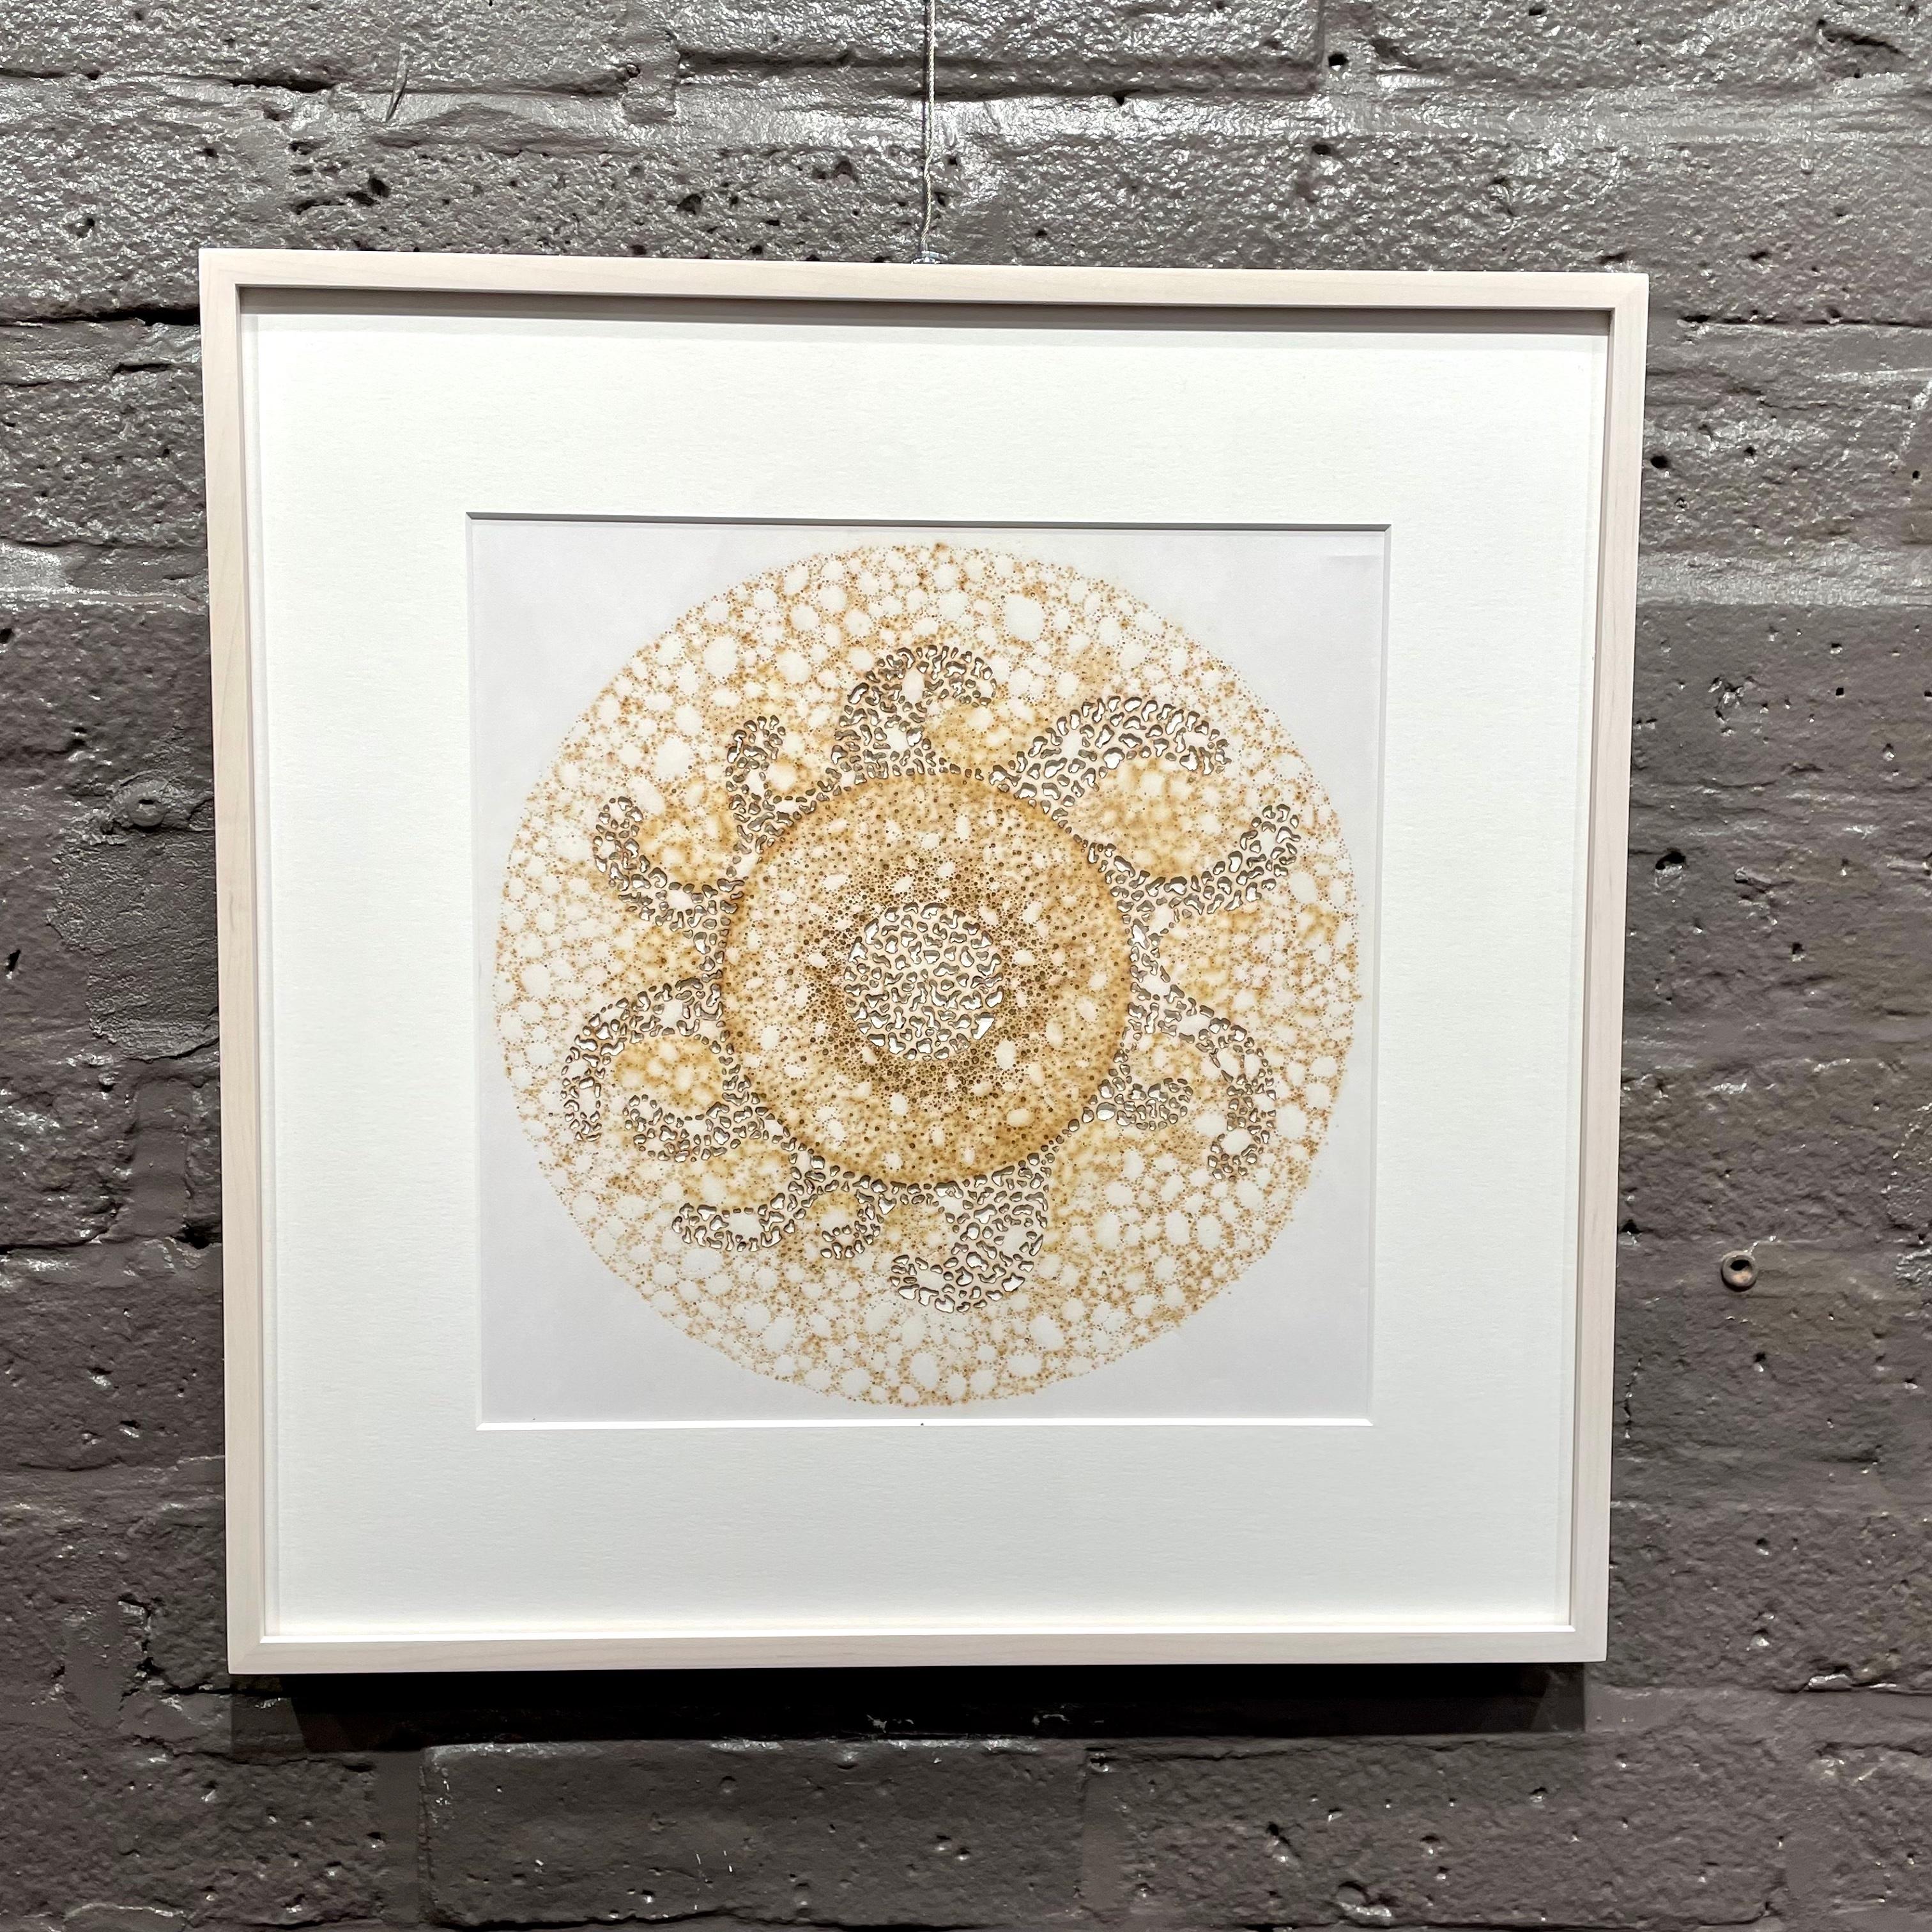 CDV 8 - earth tone geometric abstract circle with burn holes on paper - Art by Nathalie Palomino